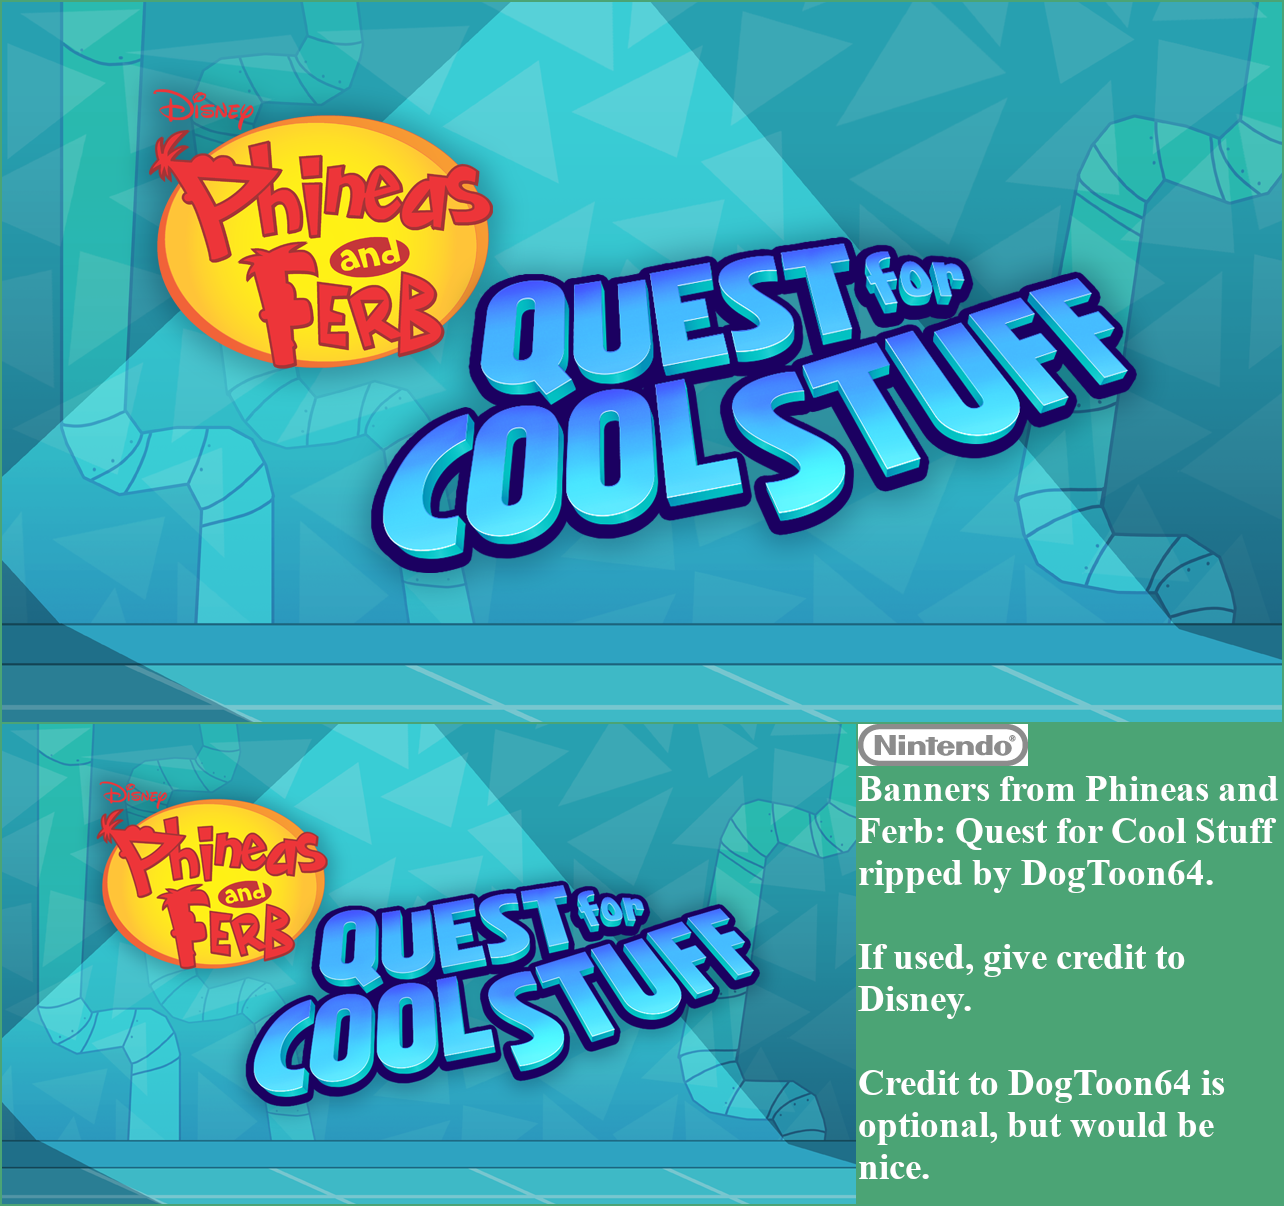 Wii U - Phineas and Ferb: Quest for Cool Stuff - Banners - The